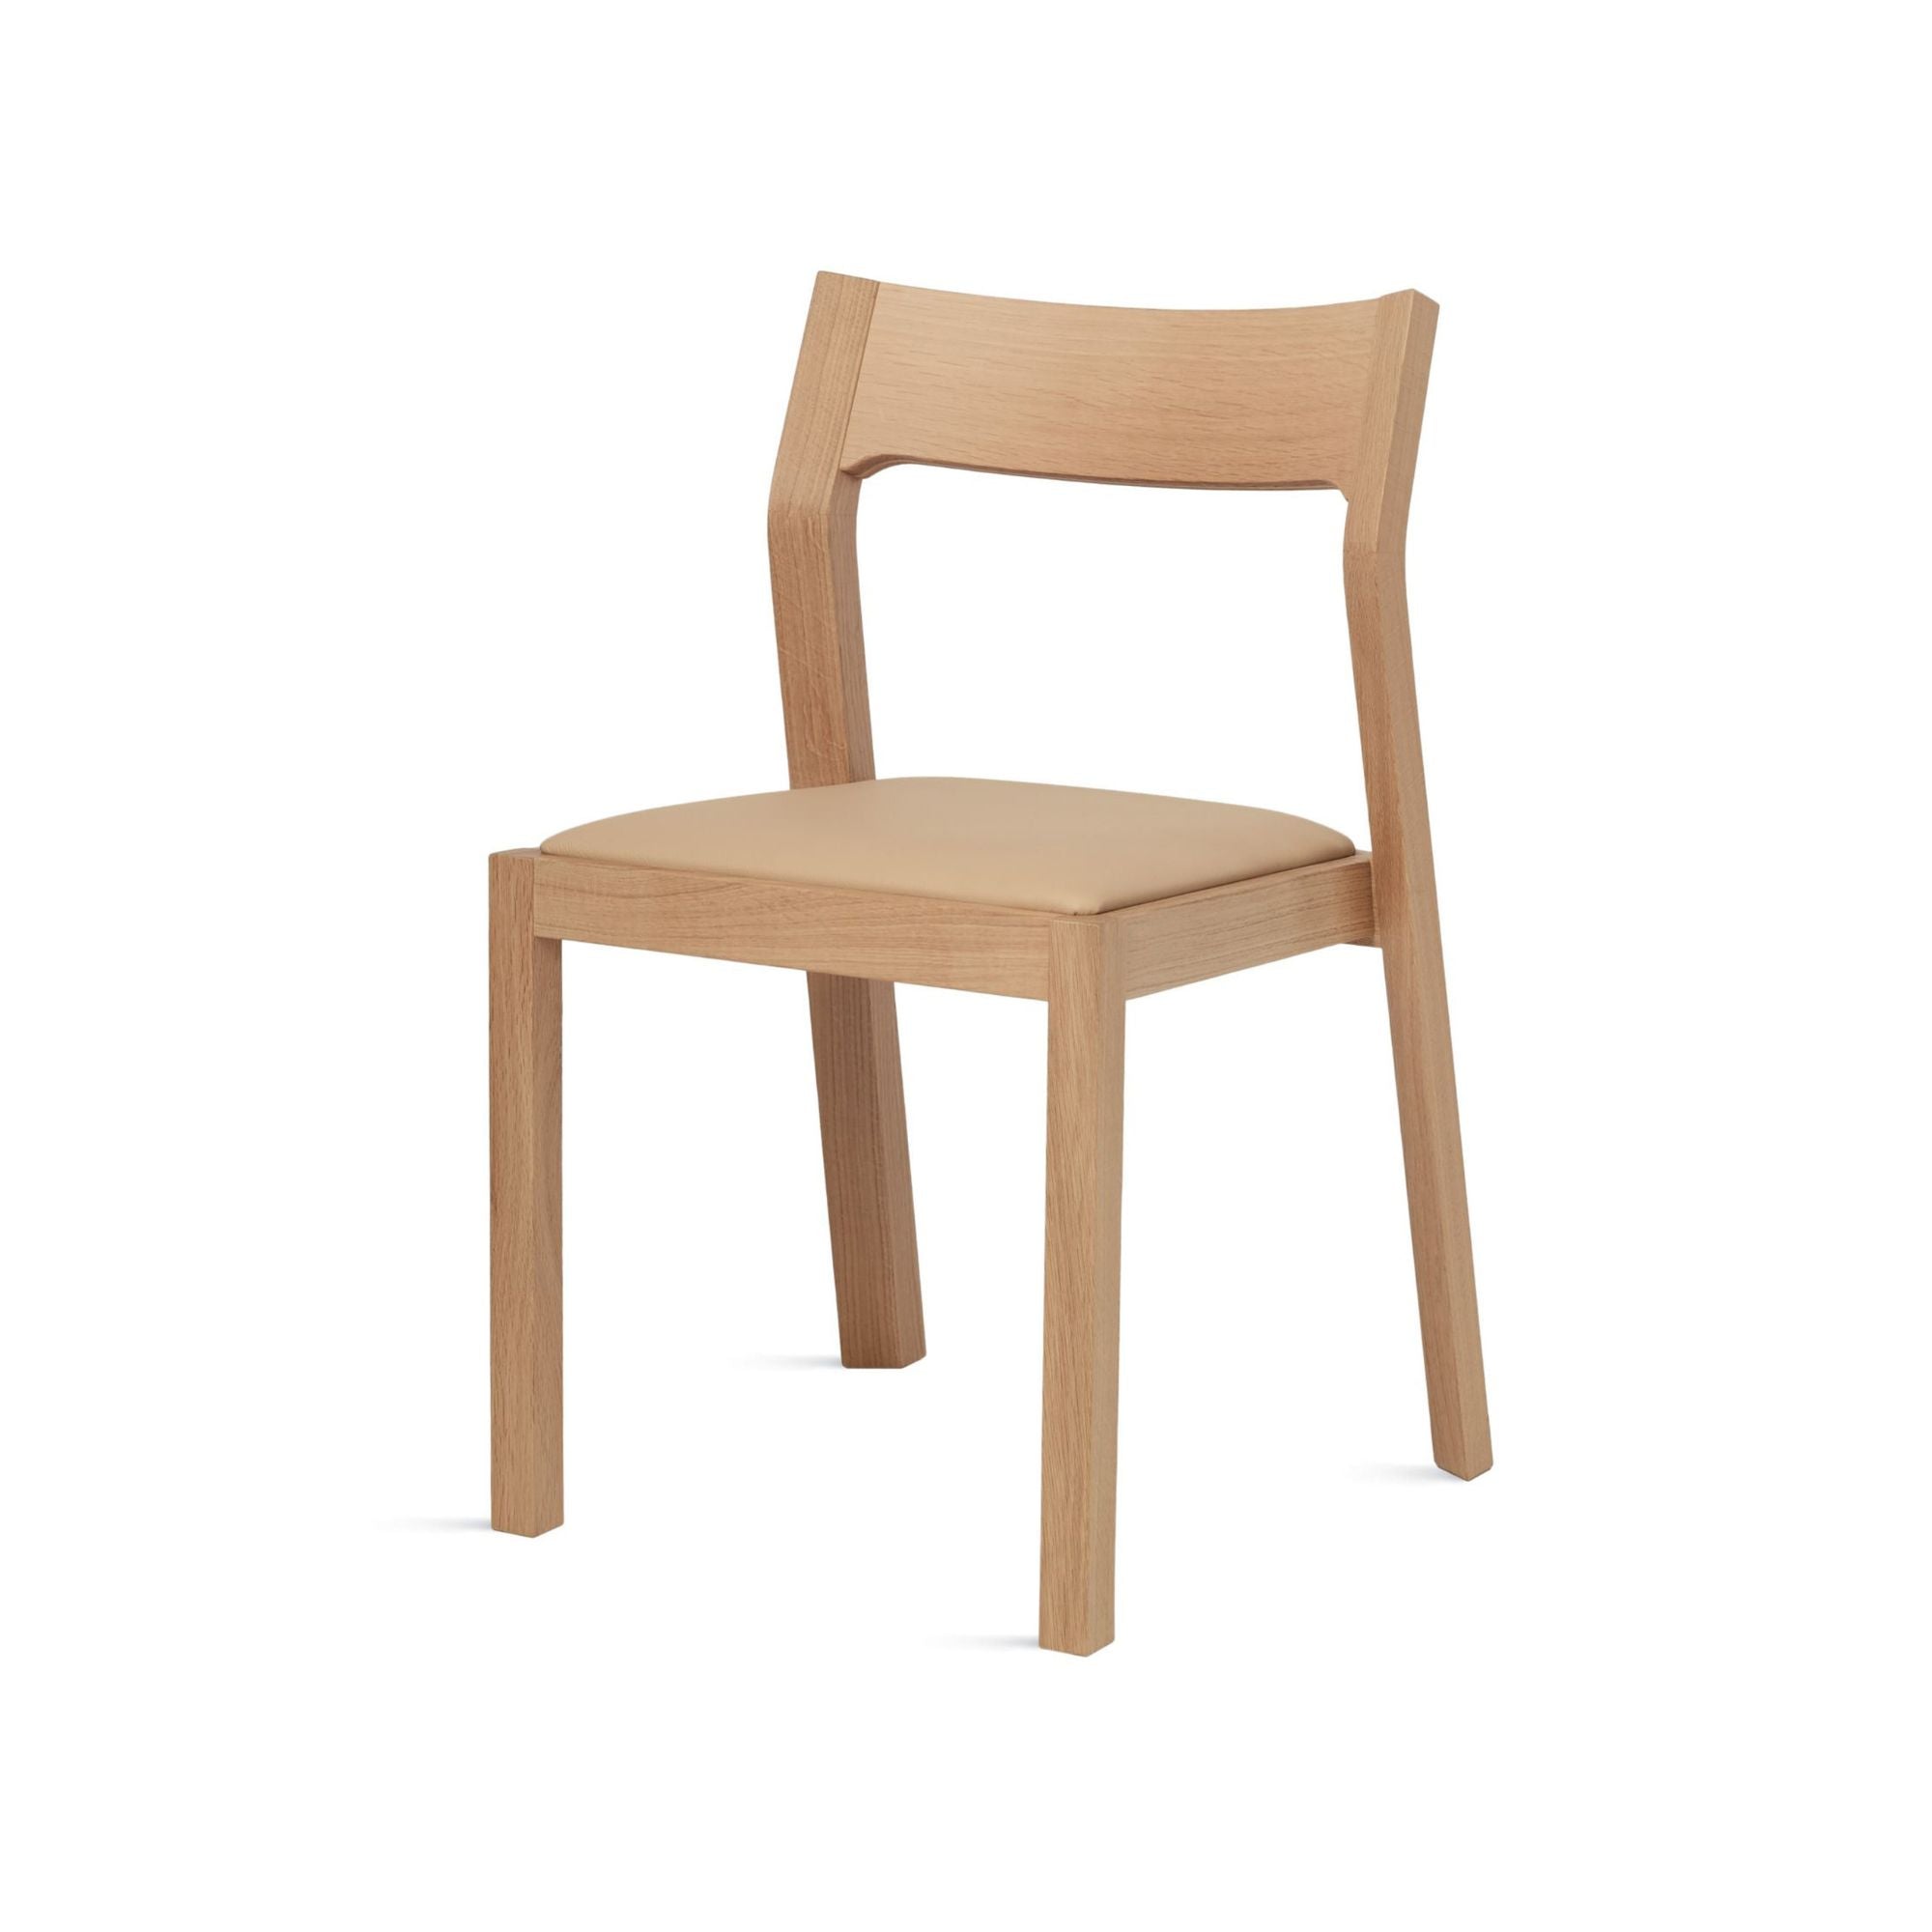 Profile Chair - THAT COOL LIVING